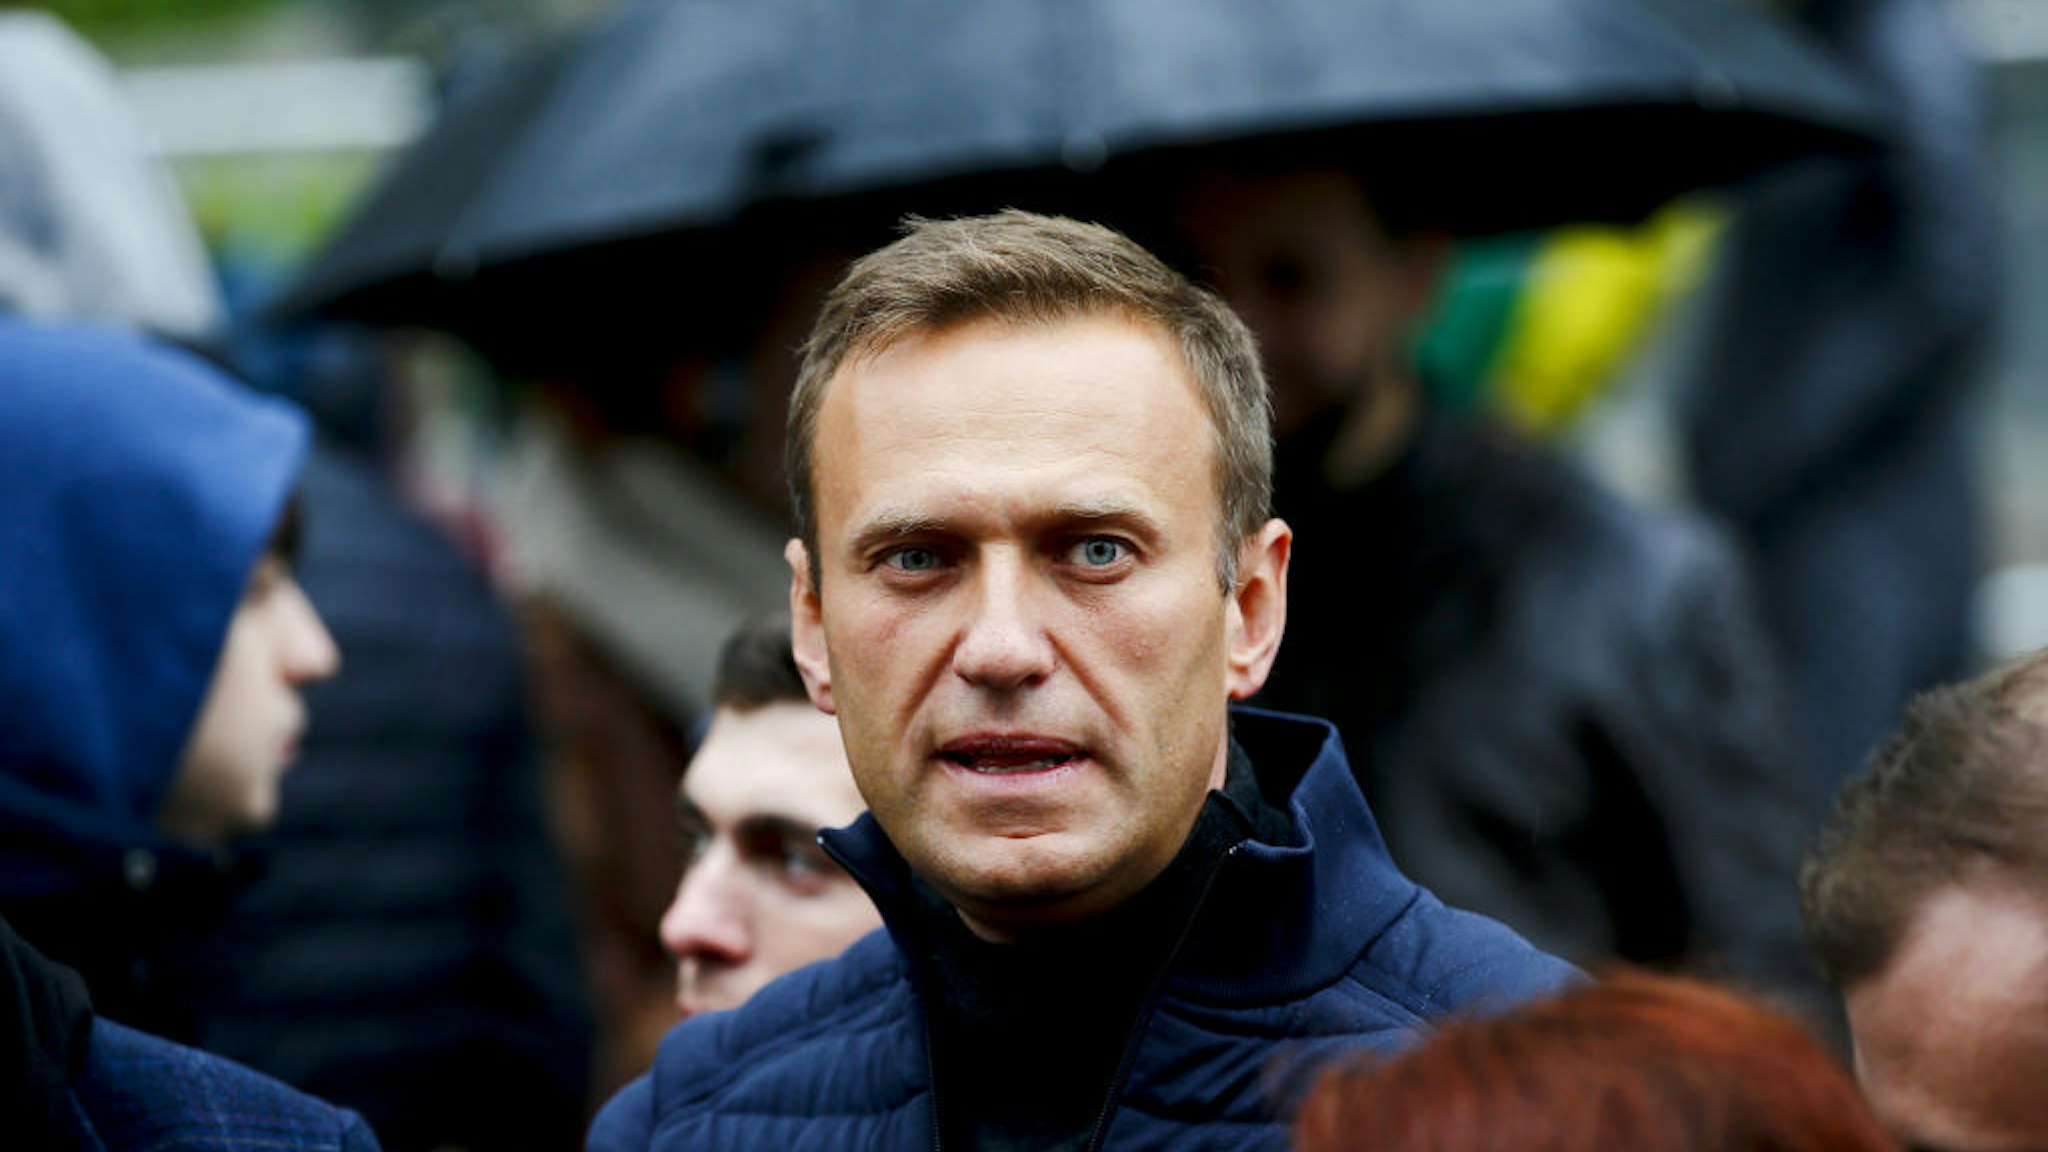 MOSCOW, RUSSIA - (ARCHIVE) : A file photo dated September 29, 2019 shows Russian opposition leader Alexei Navalny during a rally in support of political prisoners in Prospekt Sakharova Street in Moscow, Russia. Alexei Navalny is unconscious in hospital after allegedly being poisoned according to his press secretary. (Photo by Sefa Karacan/Anadolu Agency via Getty Images)